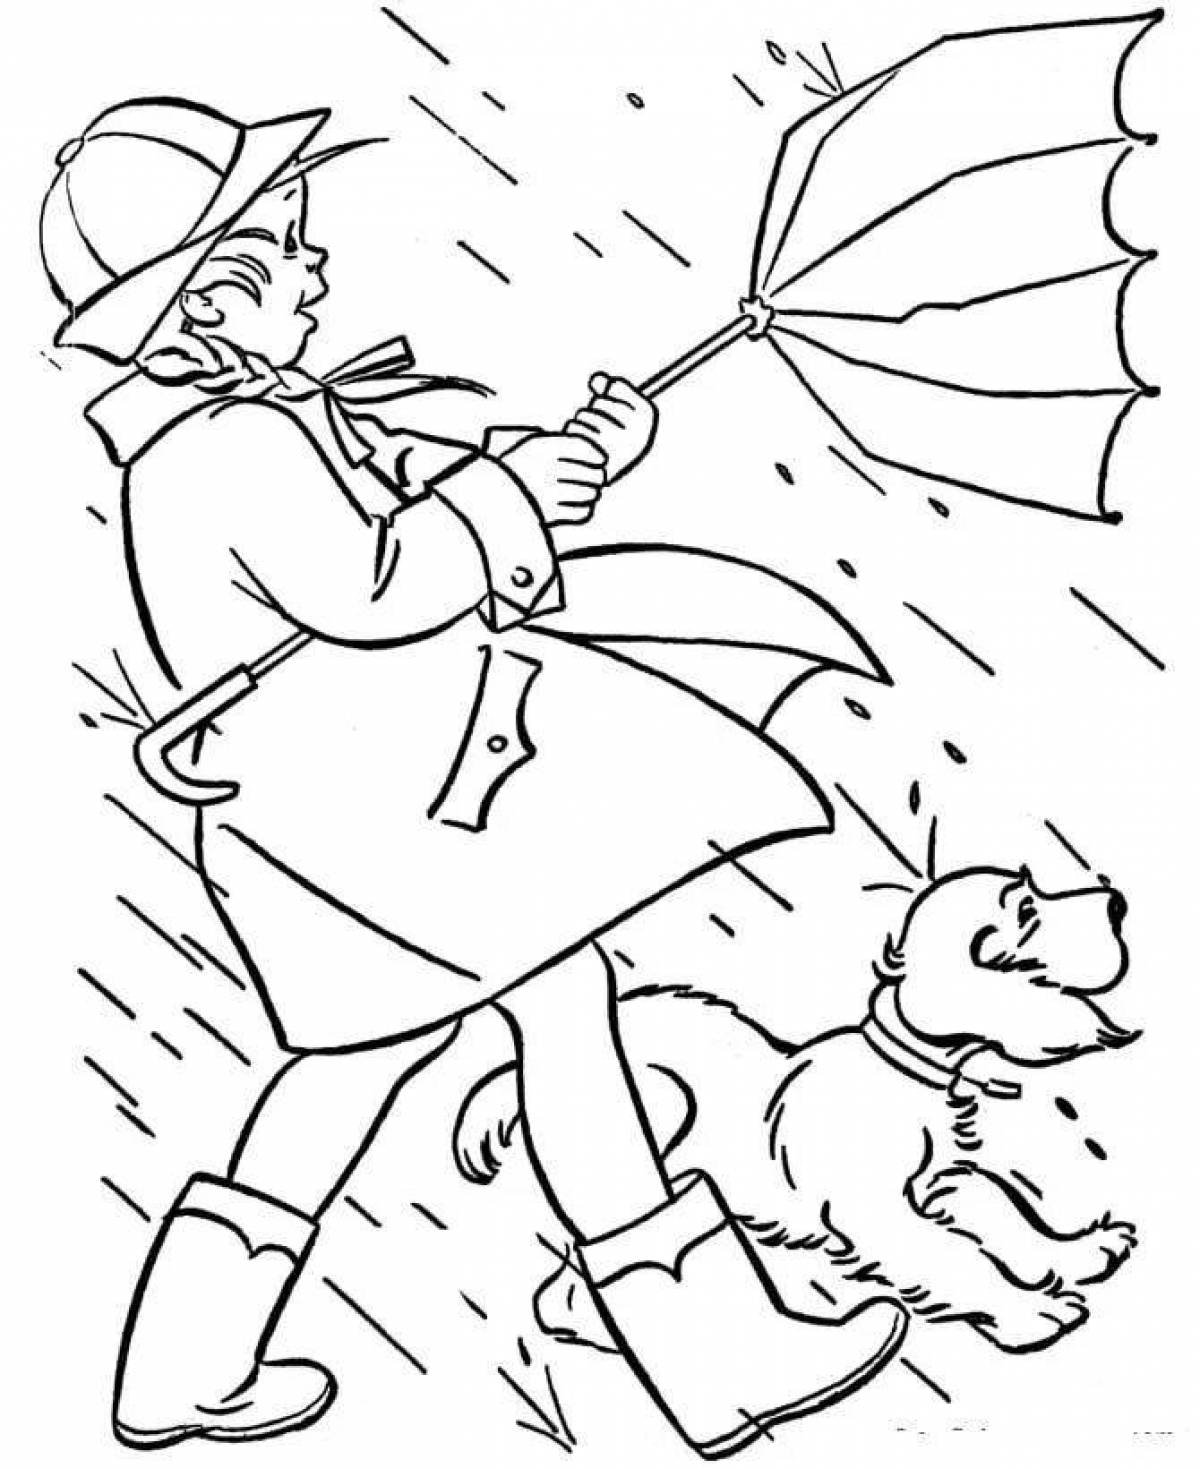 Colorful wind coloring page